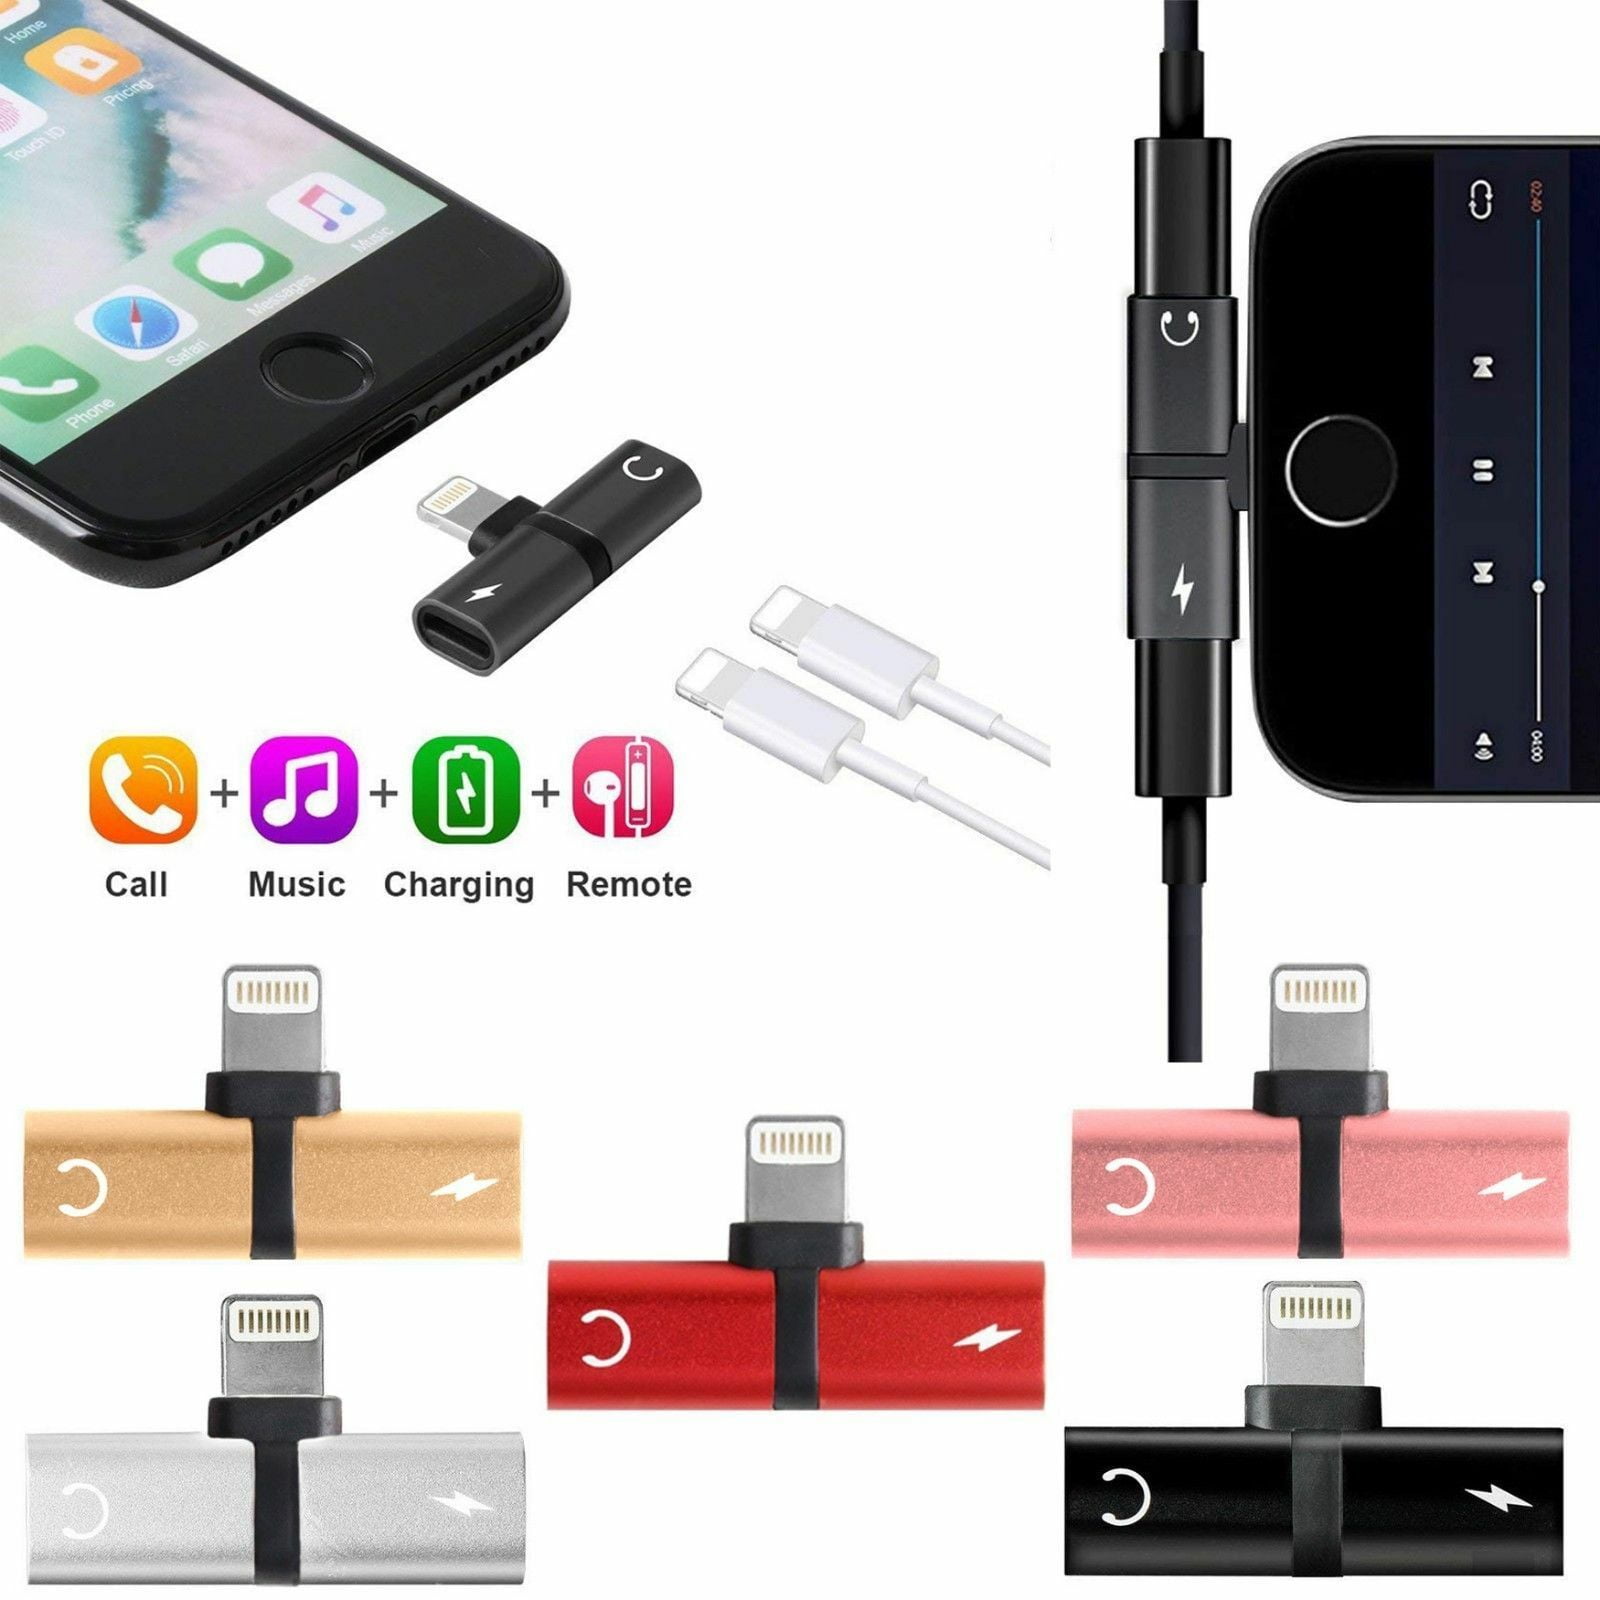 / 7/7 Plus/11 Pro,Earphone Dongle Spiltter Accessorie Support All iOS System 10 Headphone Adapter for iPhone Aux Audio to 3.5 mm Jack Adapter 2 in 1 Audio&Charge for iPhone Xs/Xs Max/XR/ 8/8 Plus/X 